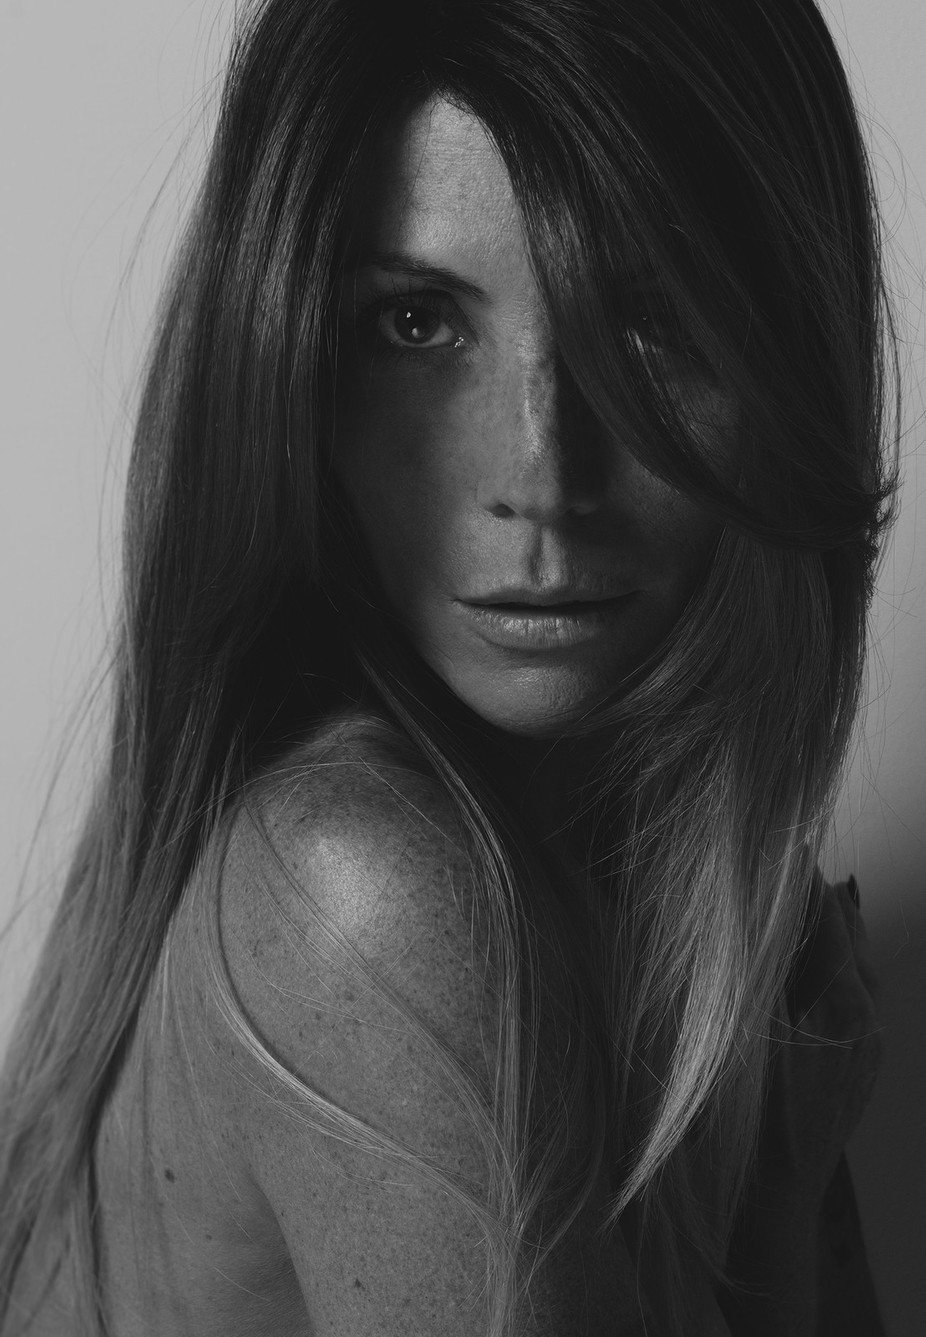 Jen by tonydenning - Black and White Portraits Photo Contest